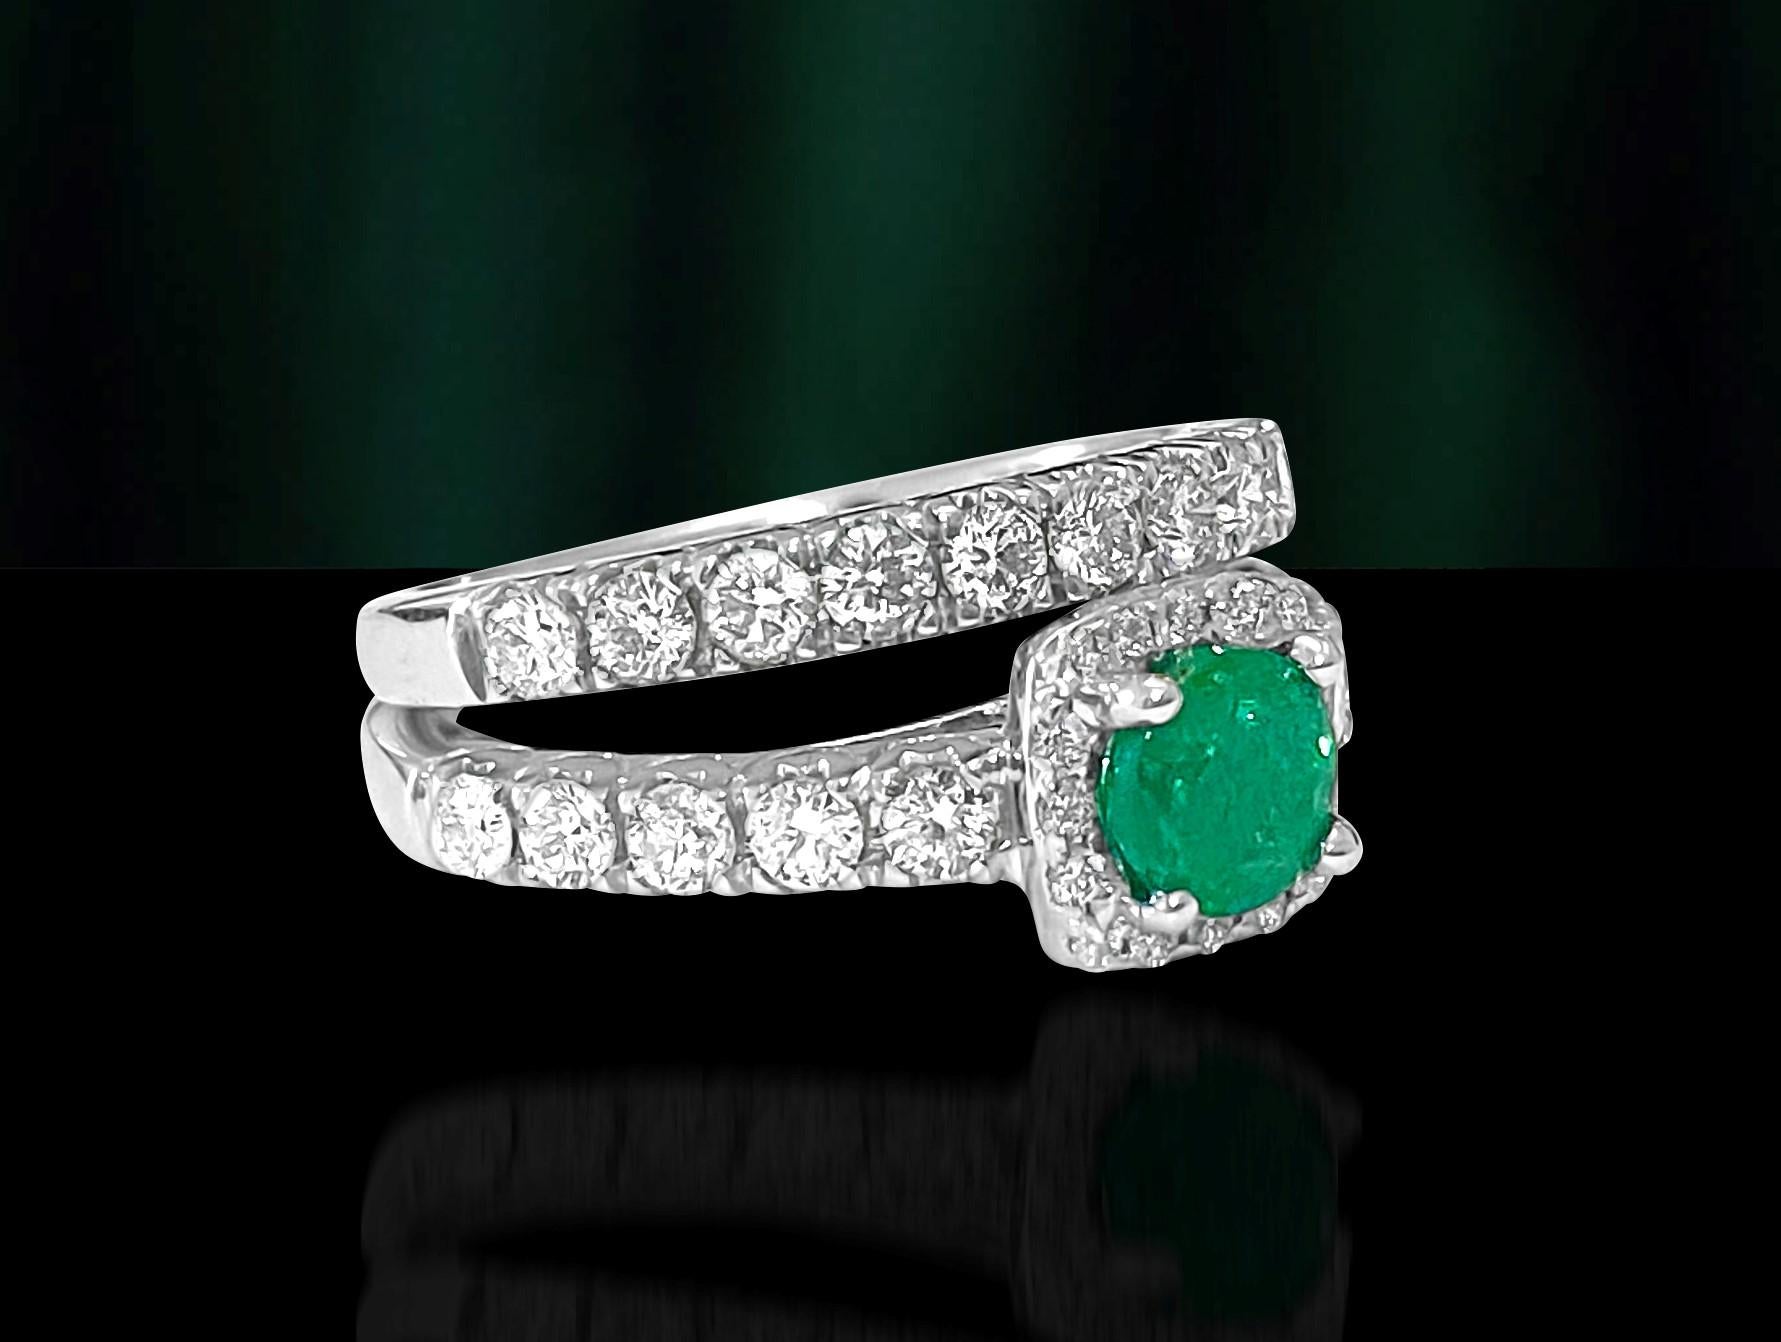 Metal: 14K white gold. 
Diamond carat weight total: 1.20 carats. Round brilliant cut. VS2-SI1 clarity and F color.

Emerald: 0.60 carats. Round cut. Colombian Emerald set in prongs. 

Total carat weight of all precious stones: 1.80 cts.
 
Total